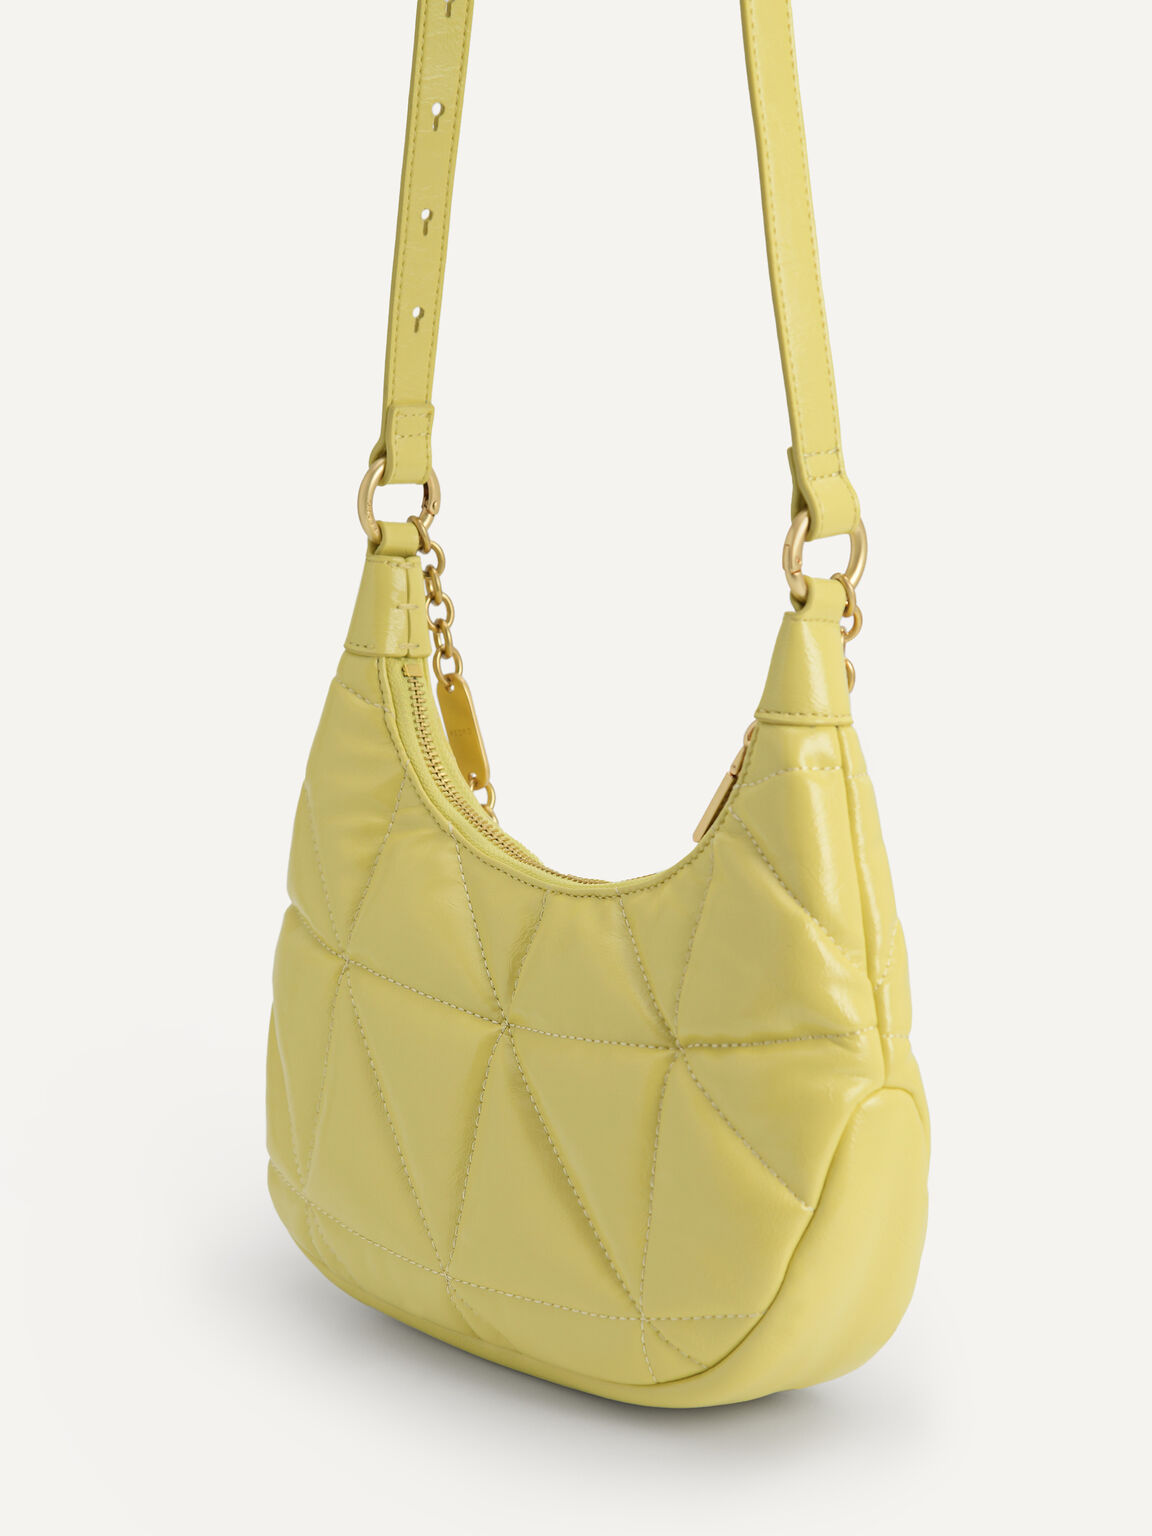 Crinkled Chain Shoulder Bag, Yellow